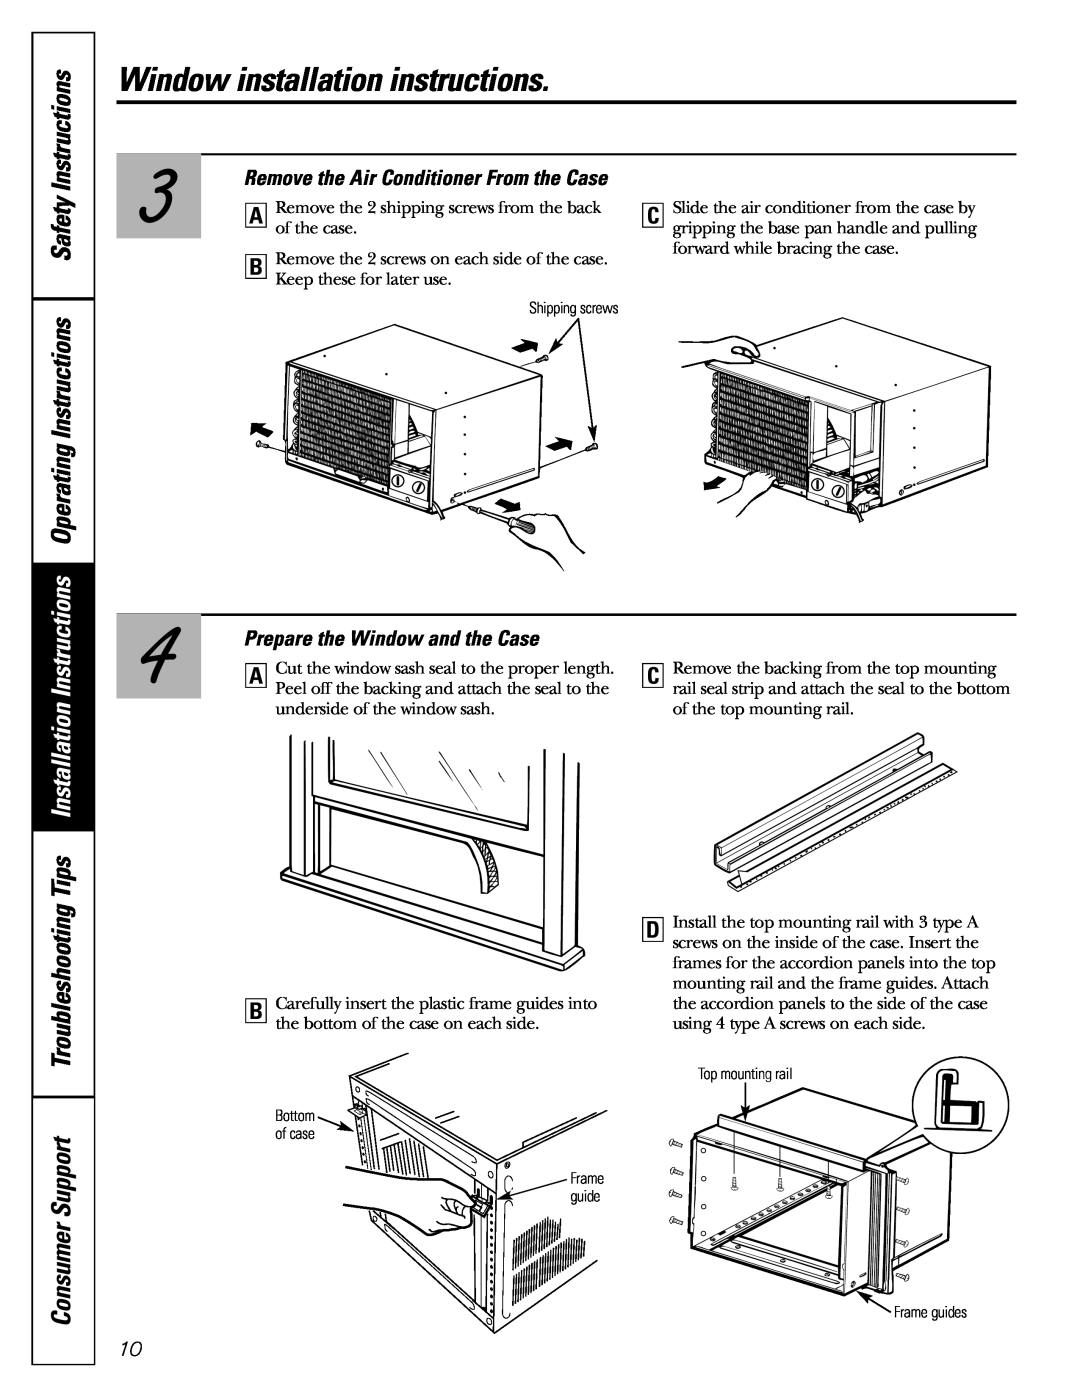 GE AGE12 Consumer Support, Instructions, Prepare the Window and the Case, Remove the Air Conditioner From the Case, Safety 